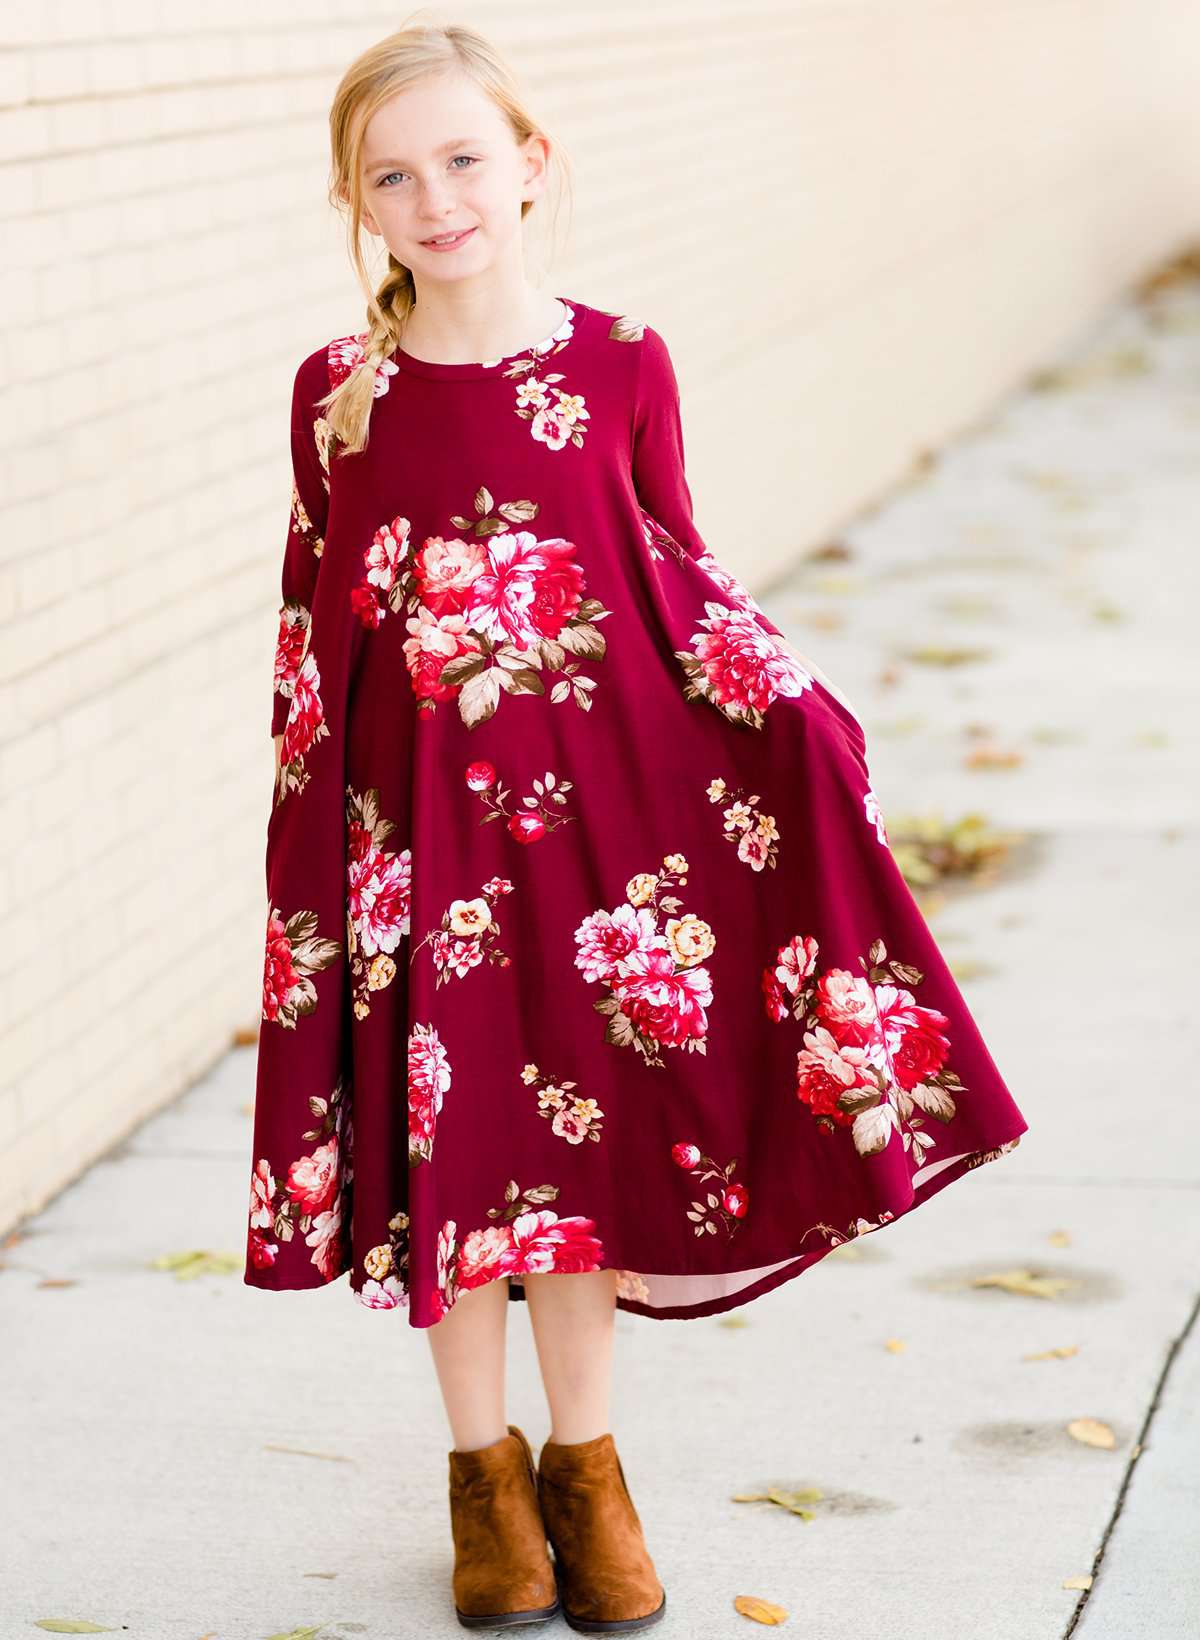 Modest girls and conservative teens burgandy and olive floral swing dress